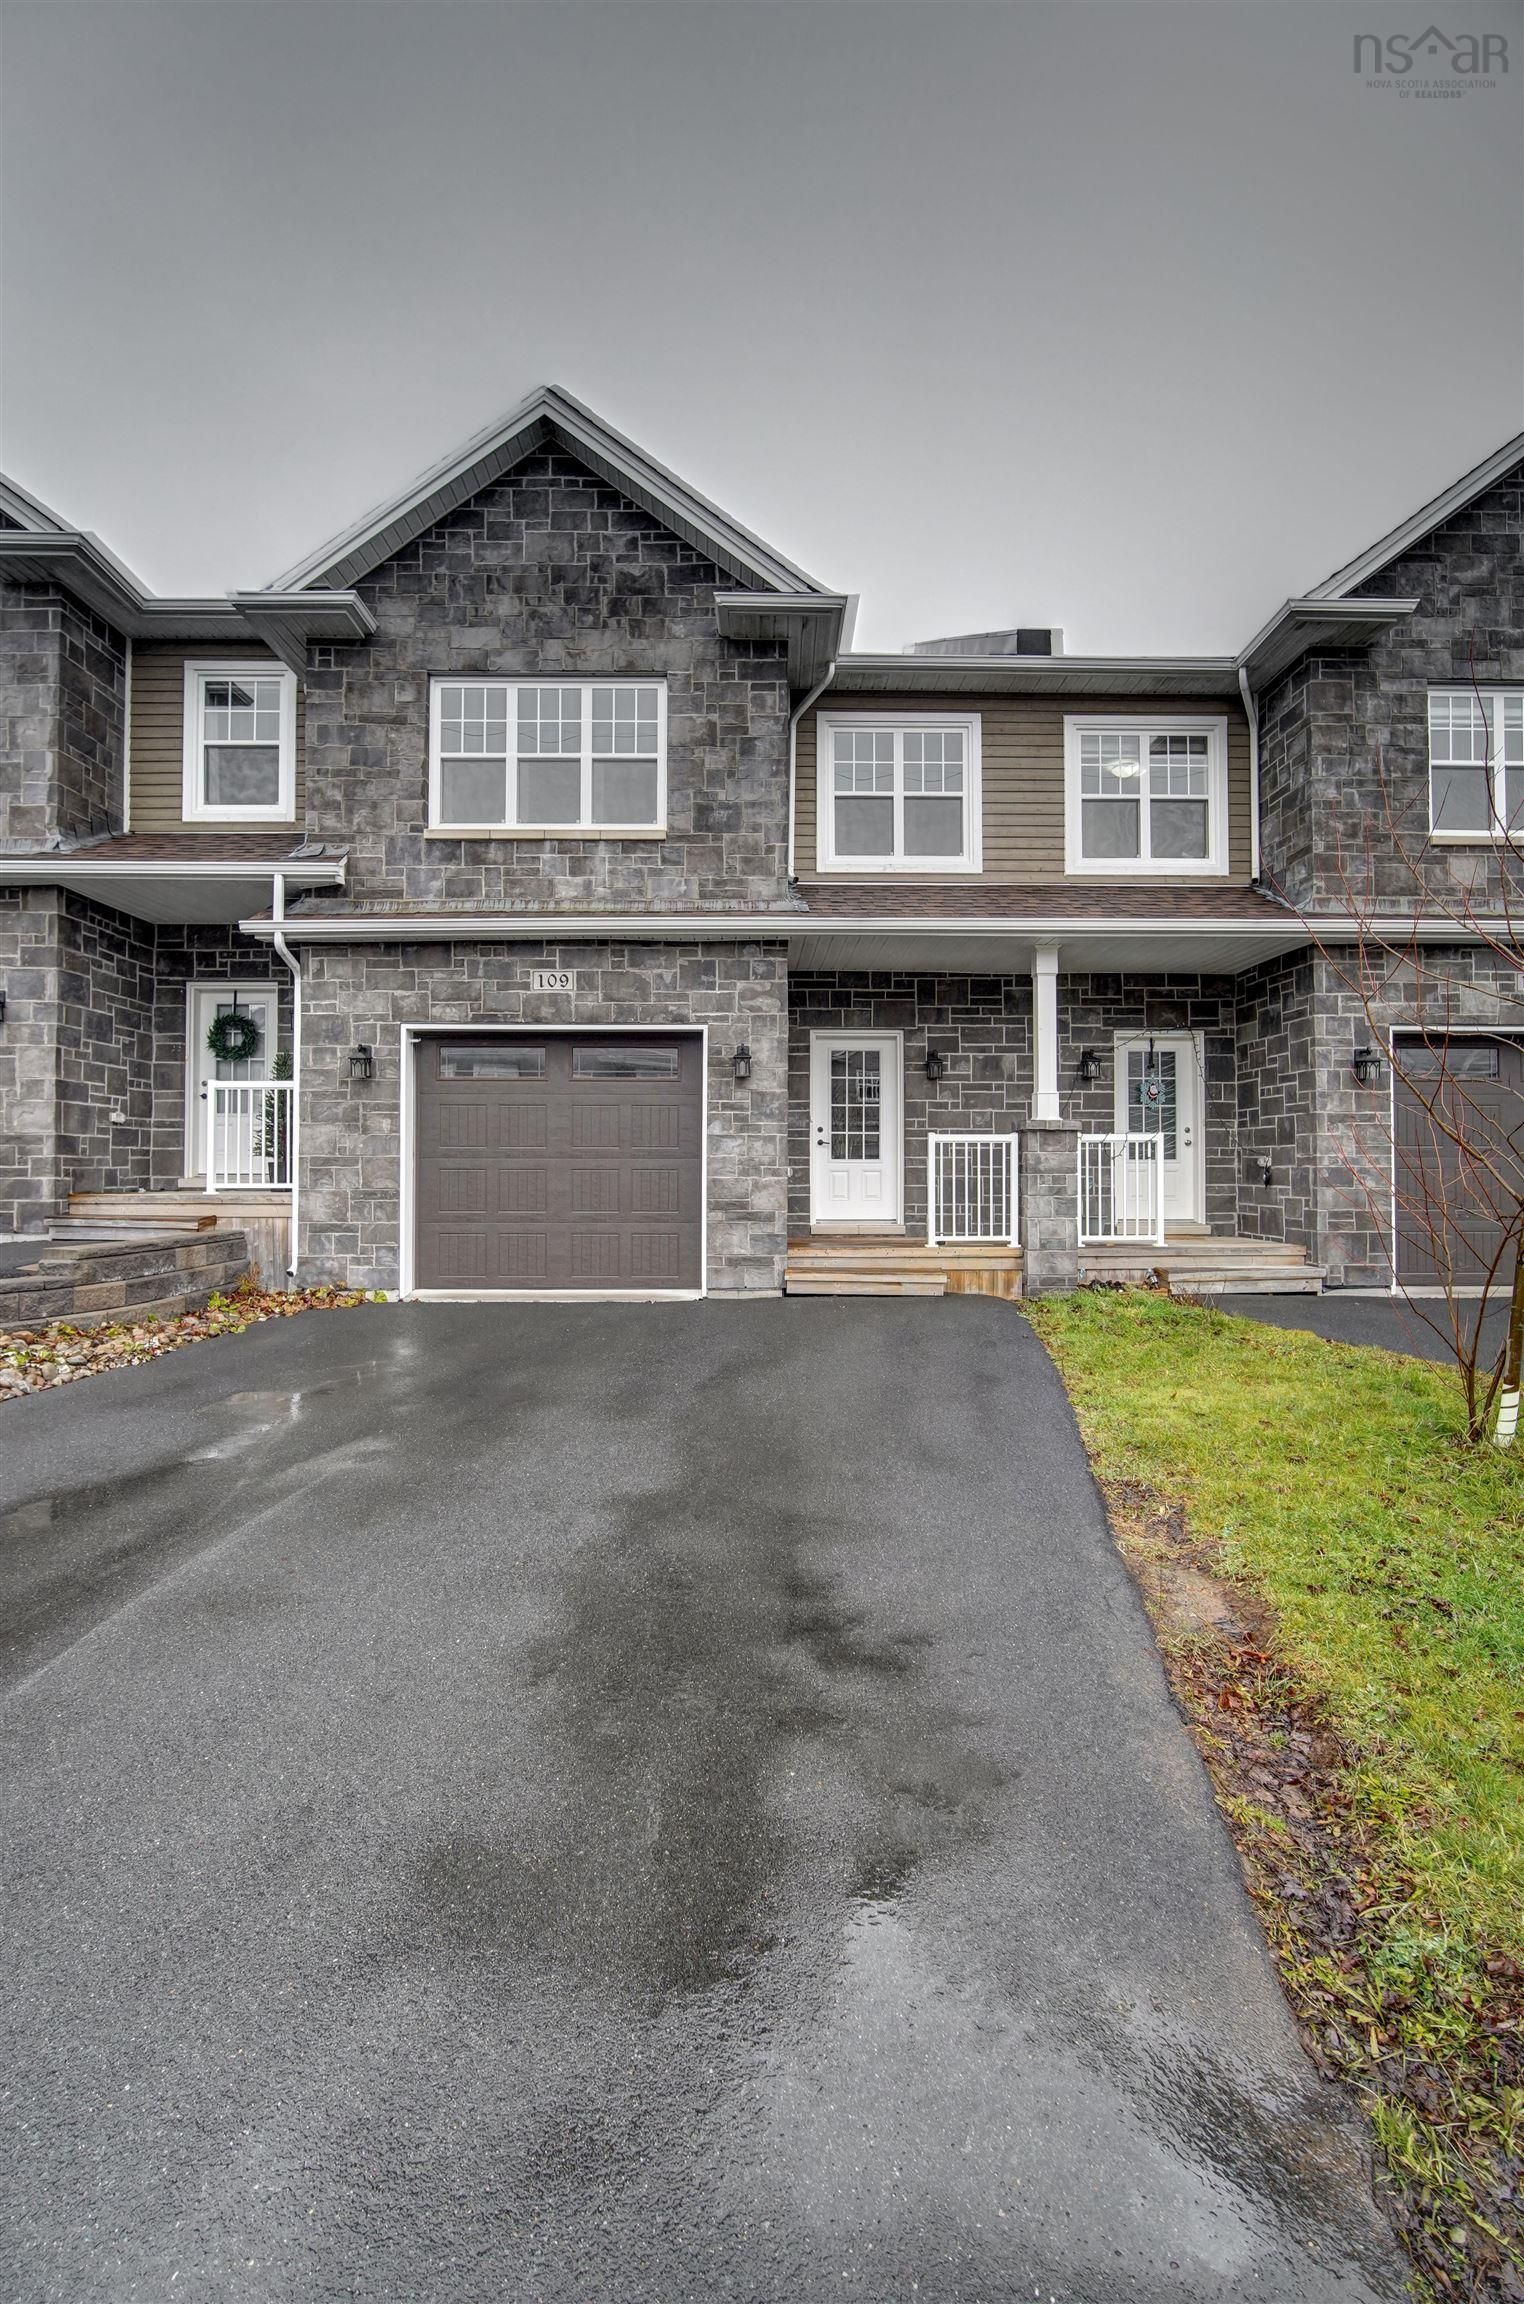 Main Photo: 109 Larkview Terrace in Bedford: 20-Bedford Residential for sale (Halifax-Dartmouth)  : MLS®# 202227224